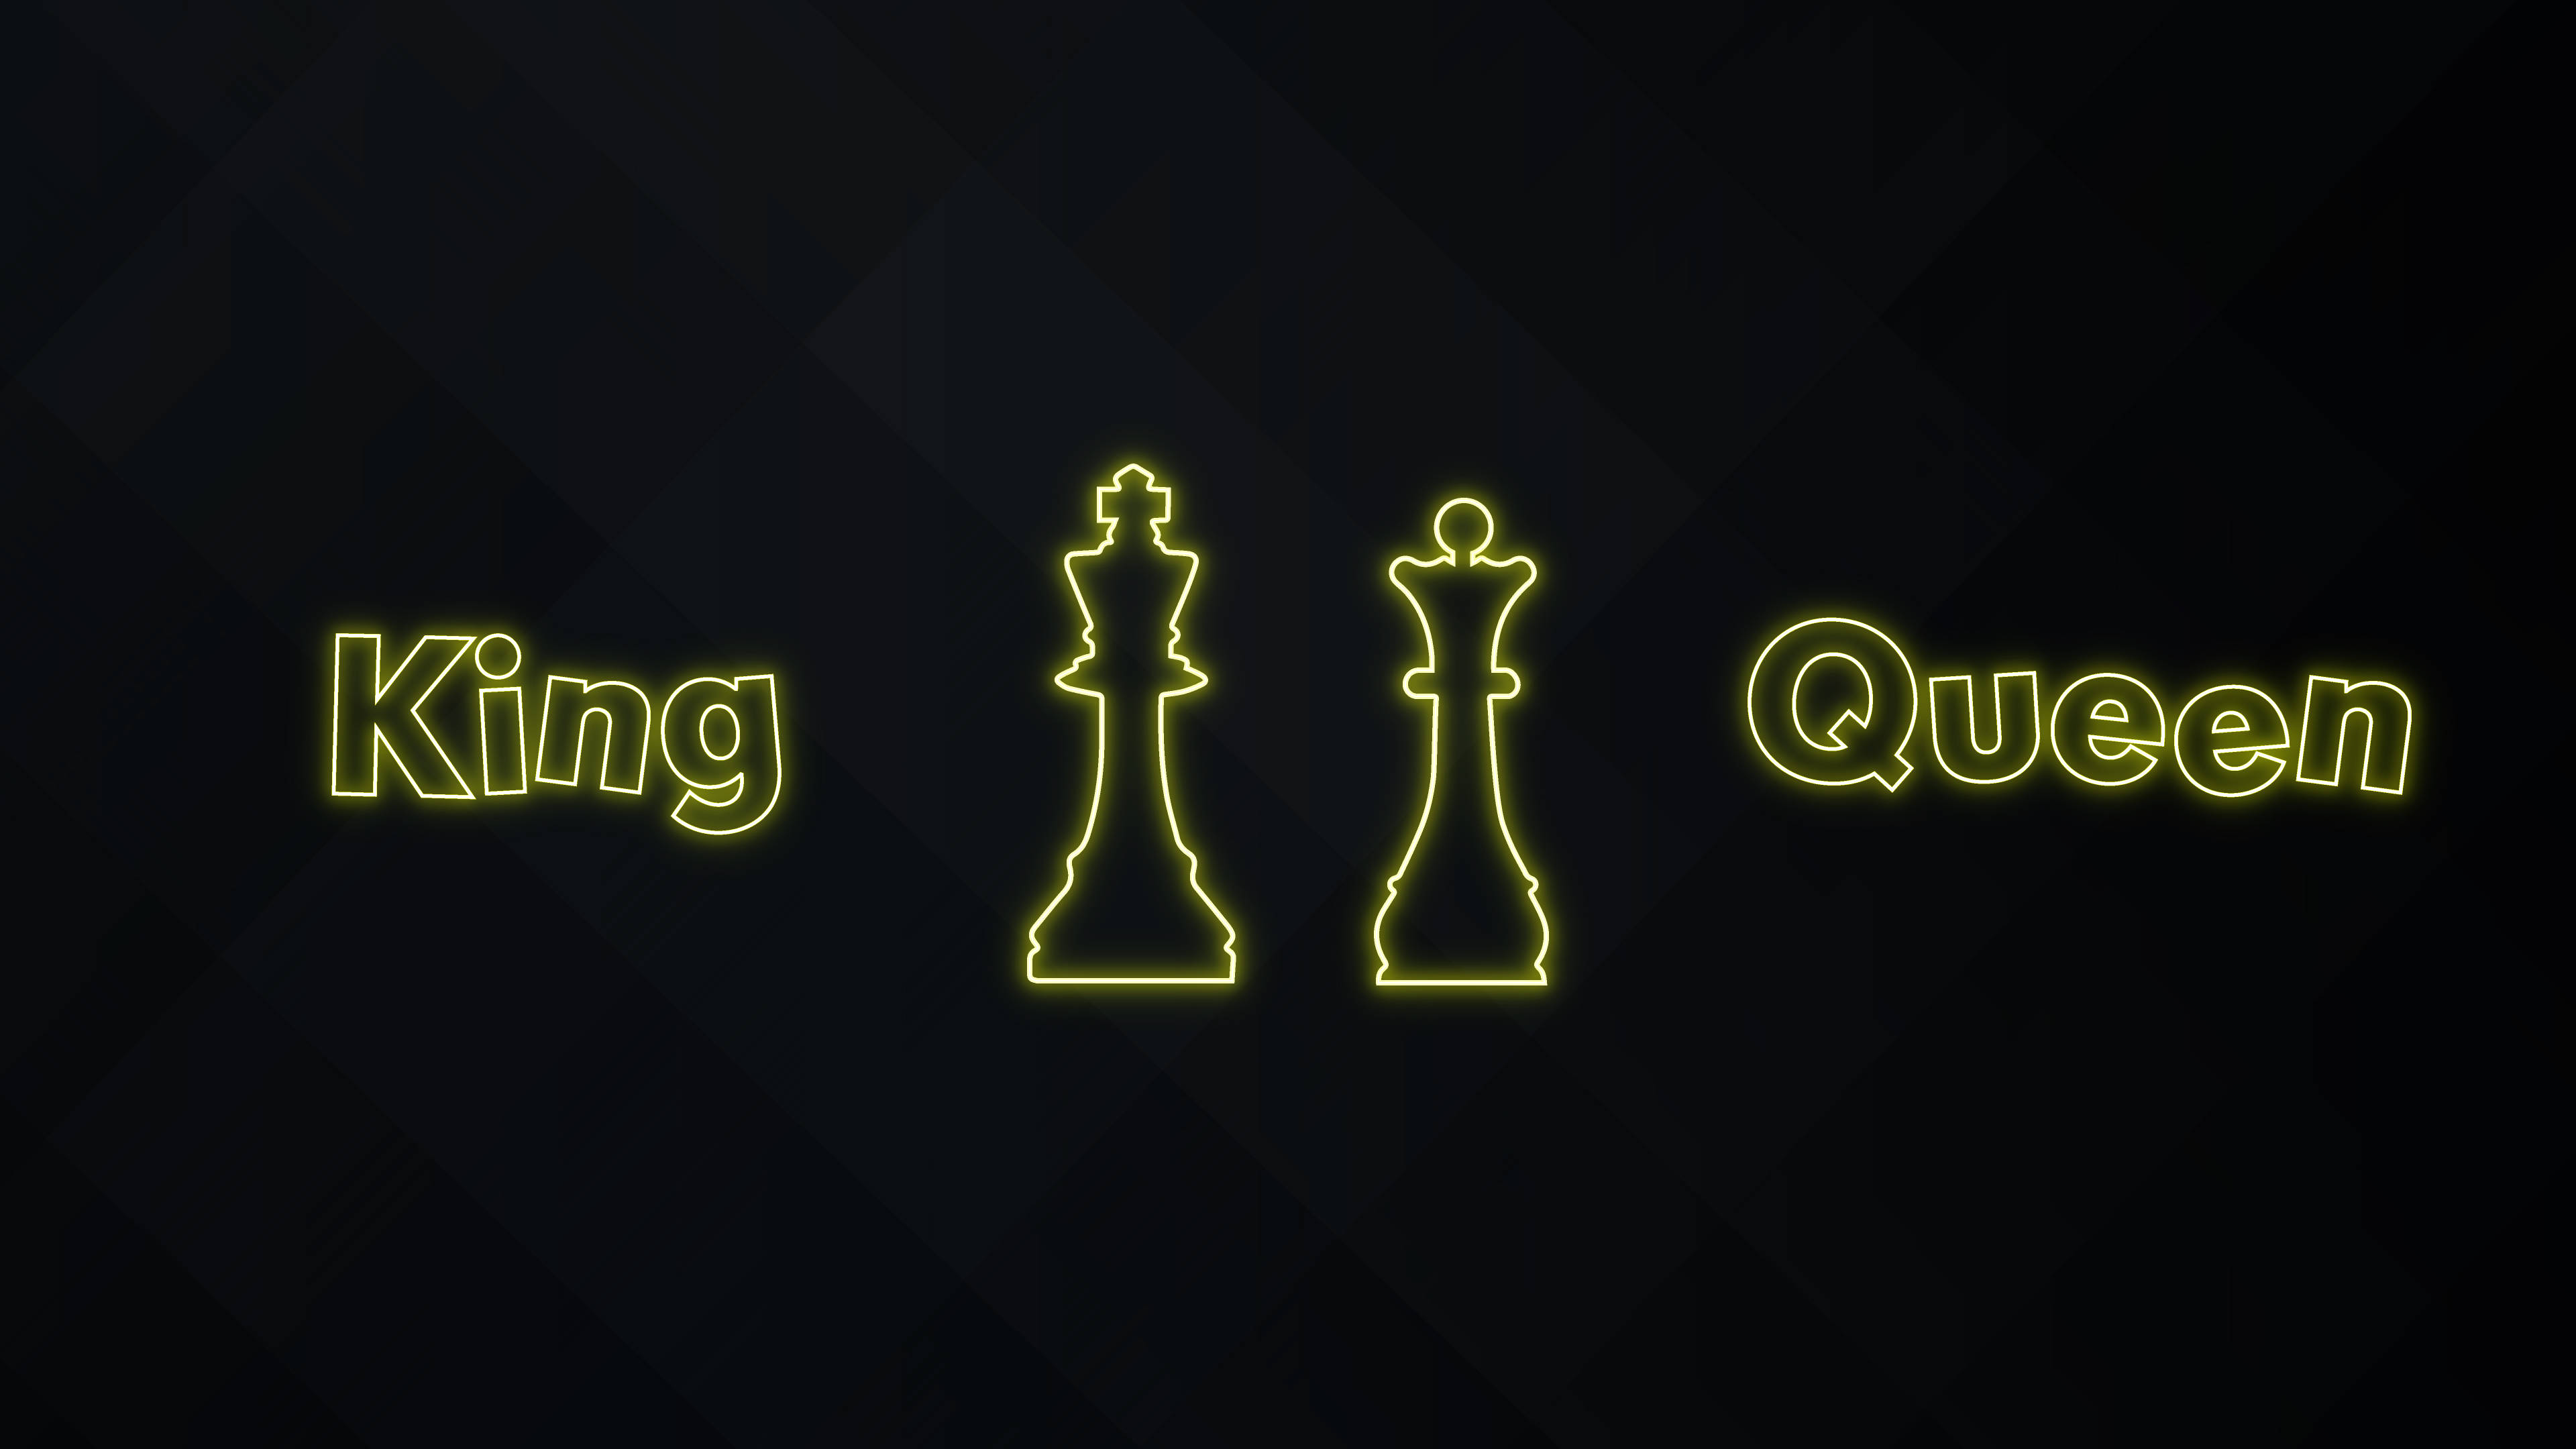 Top 999+ King And Queen Wallpaper Full HD, 4K Free to Use